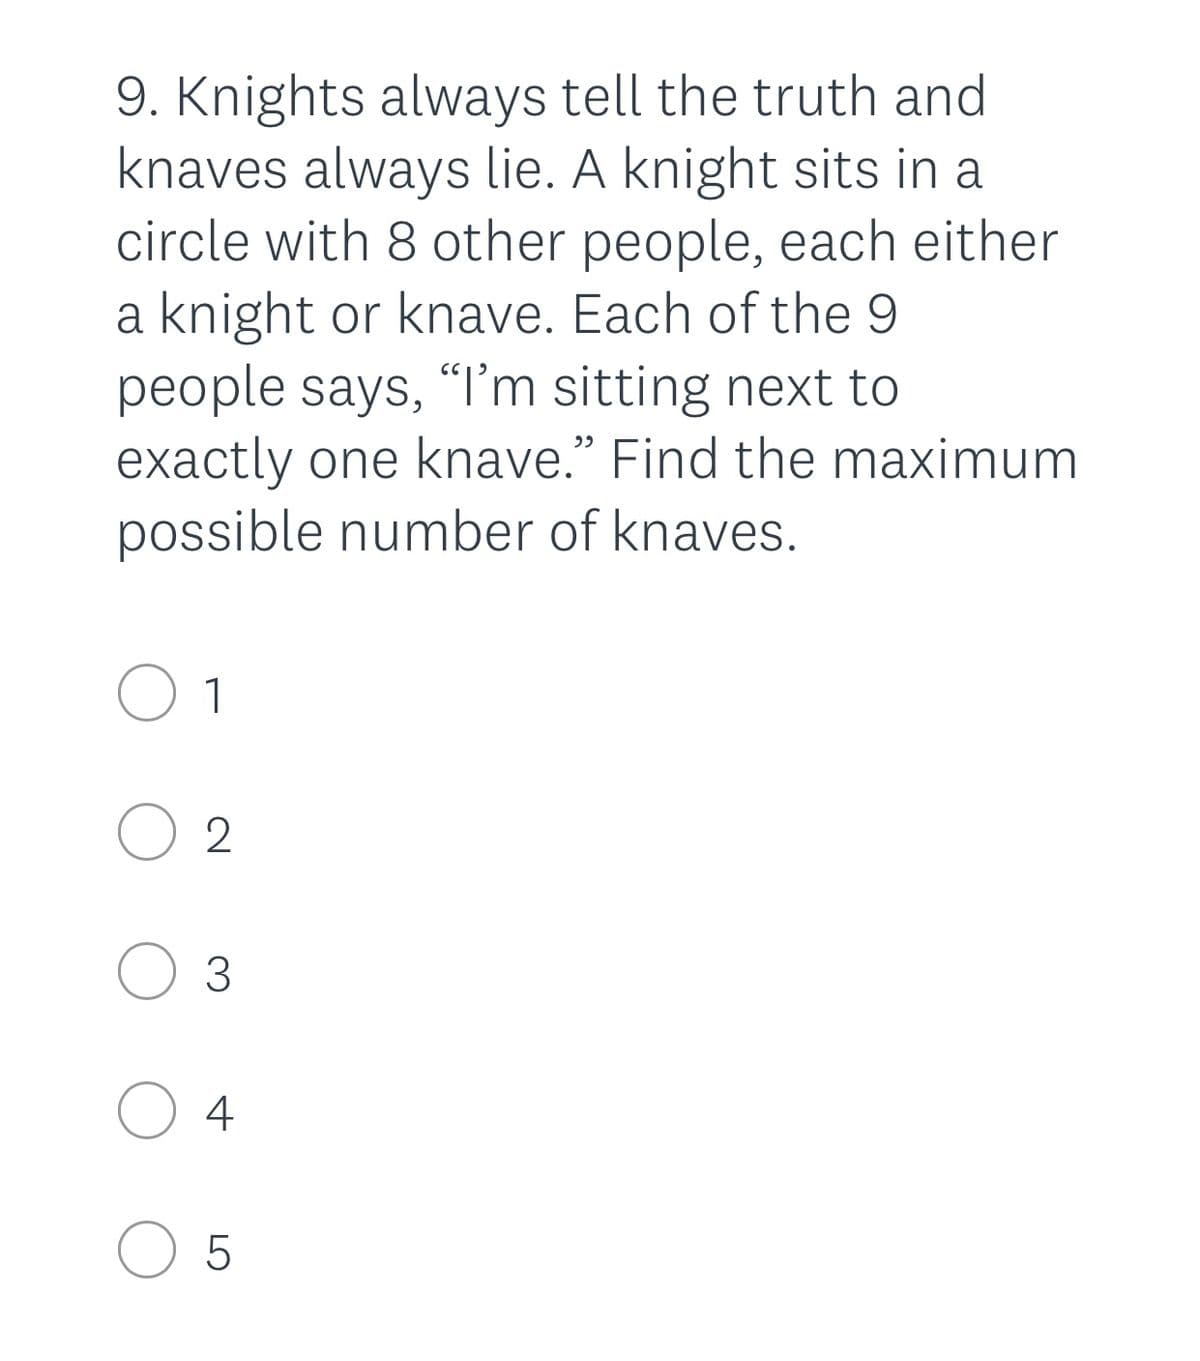 9. Knights always tell the truth and
knaves always lie. A knight sits in a
circle with 8 other people, each either
a knight or knave. Each of the 9
people says, I'm sitting next to
exactly one knave." Find the maximum
possible number of knaves.
O 1
O 2
O 3
4
O 5
